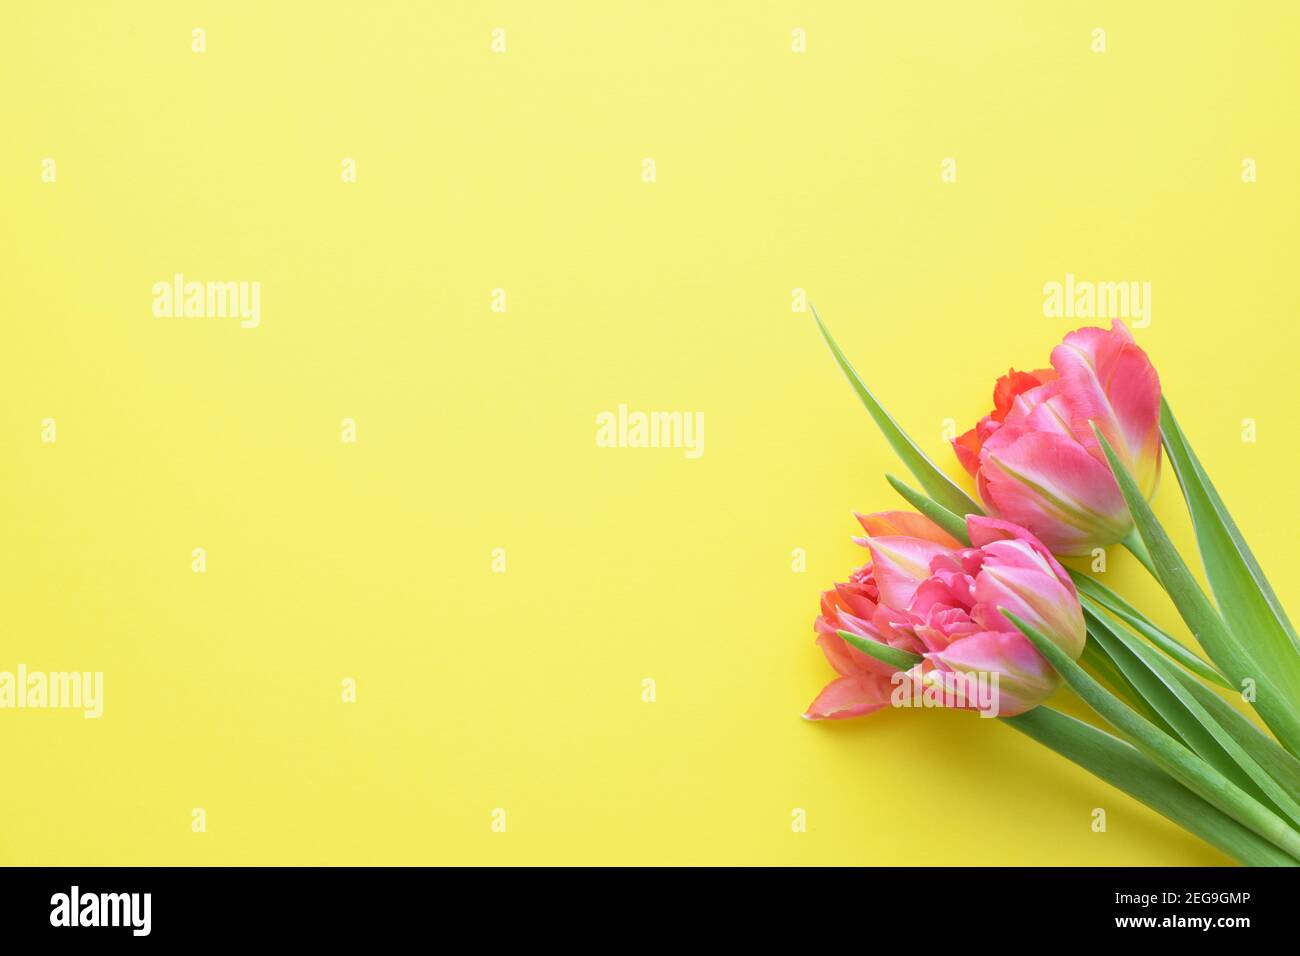 Bouquet of pink  spring tulips and place for text for Mother's Day or 8 March on a yellow background. Top view flat style. Stock Photo